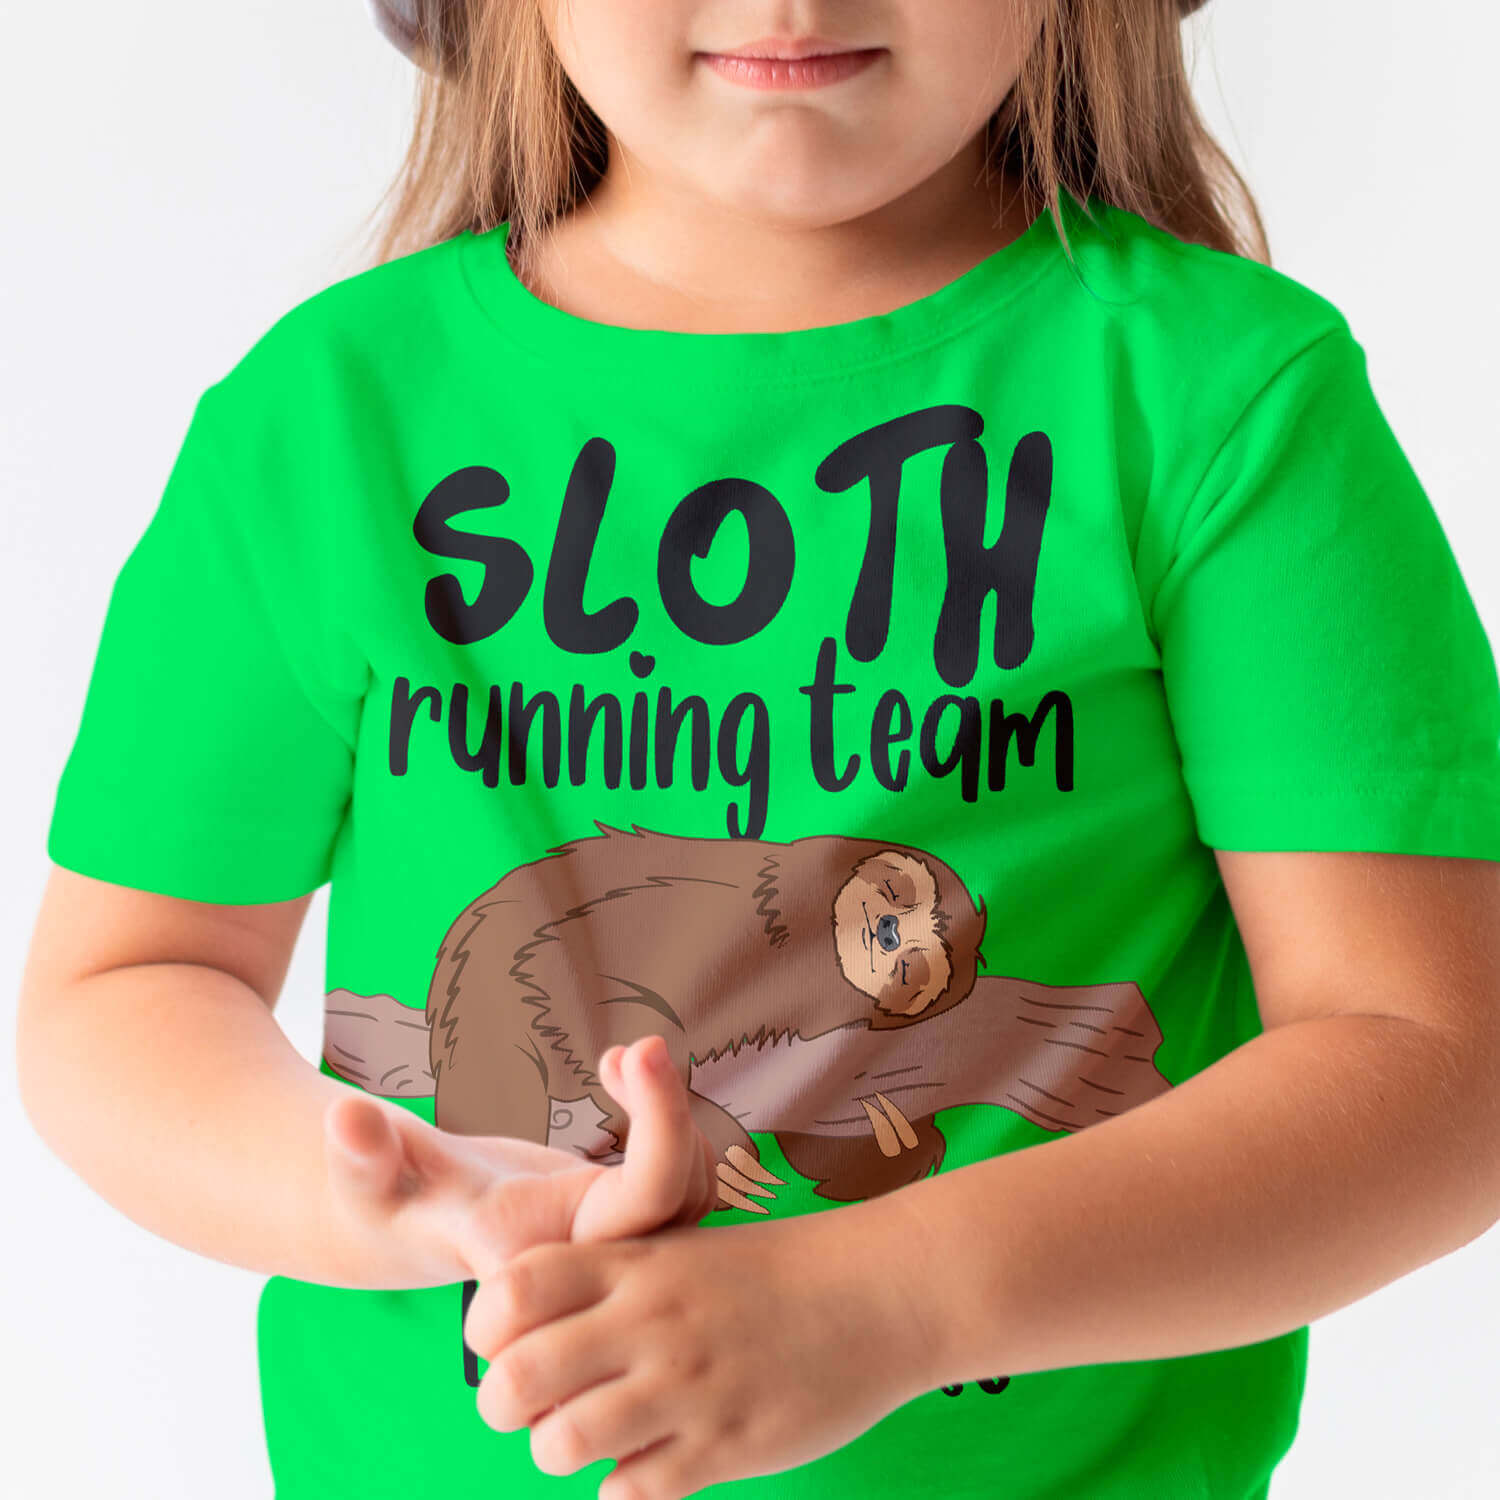 Little girl wearing a green shirt with a sloth running team on it.